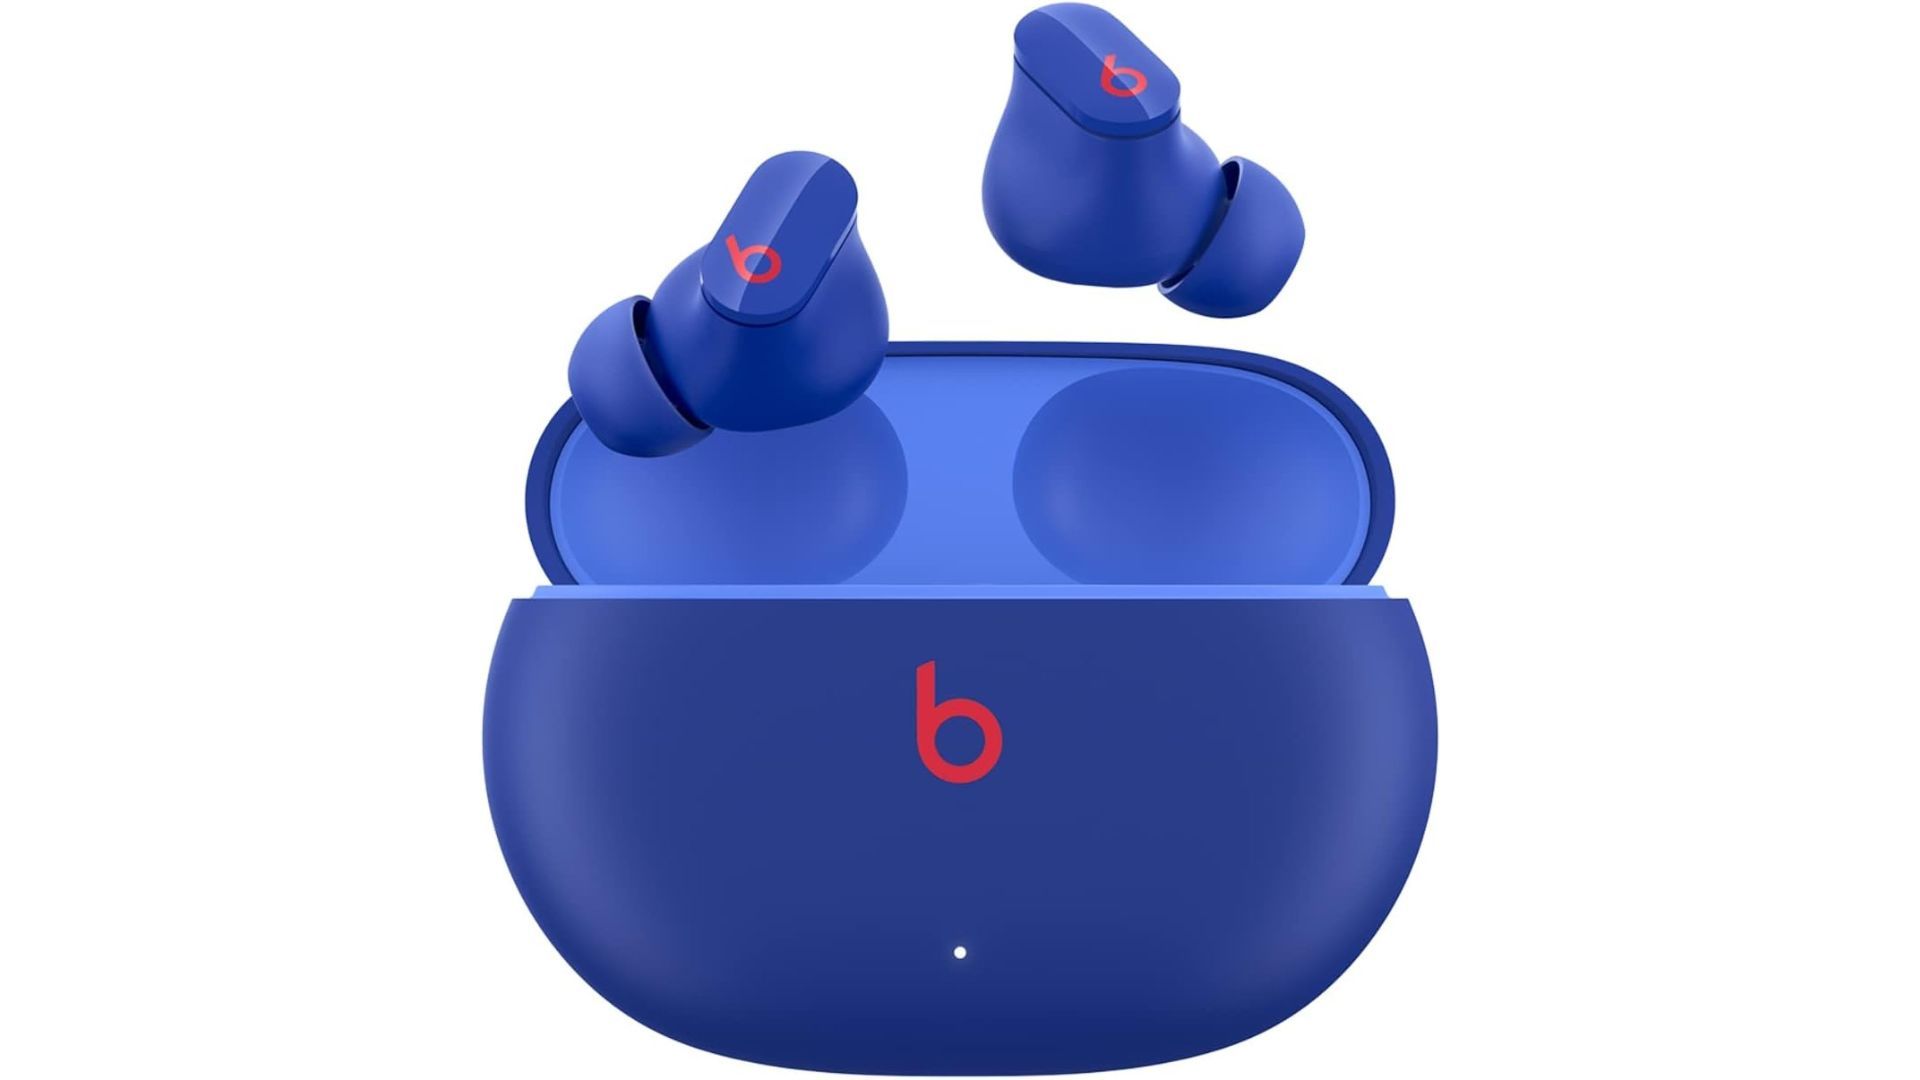 the blue earbuds and case